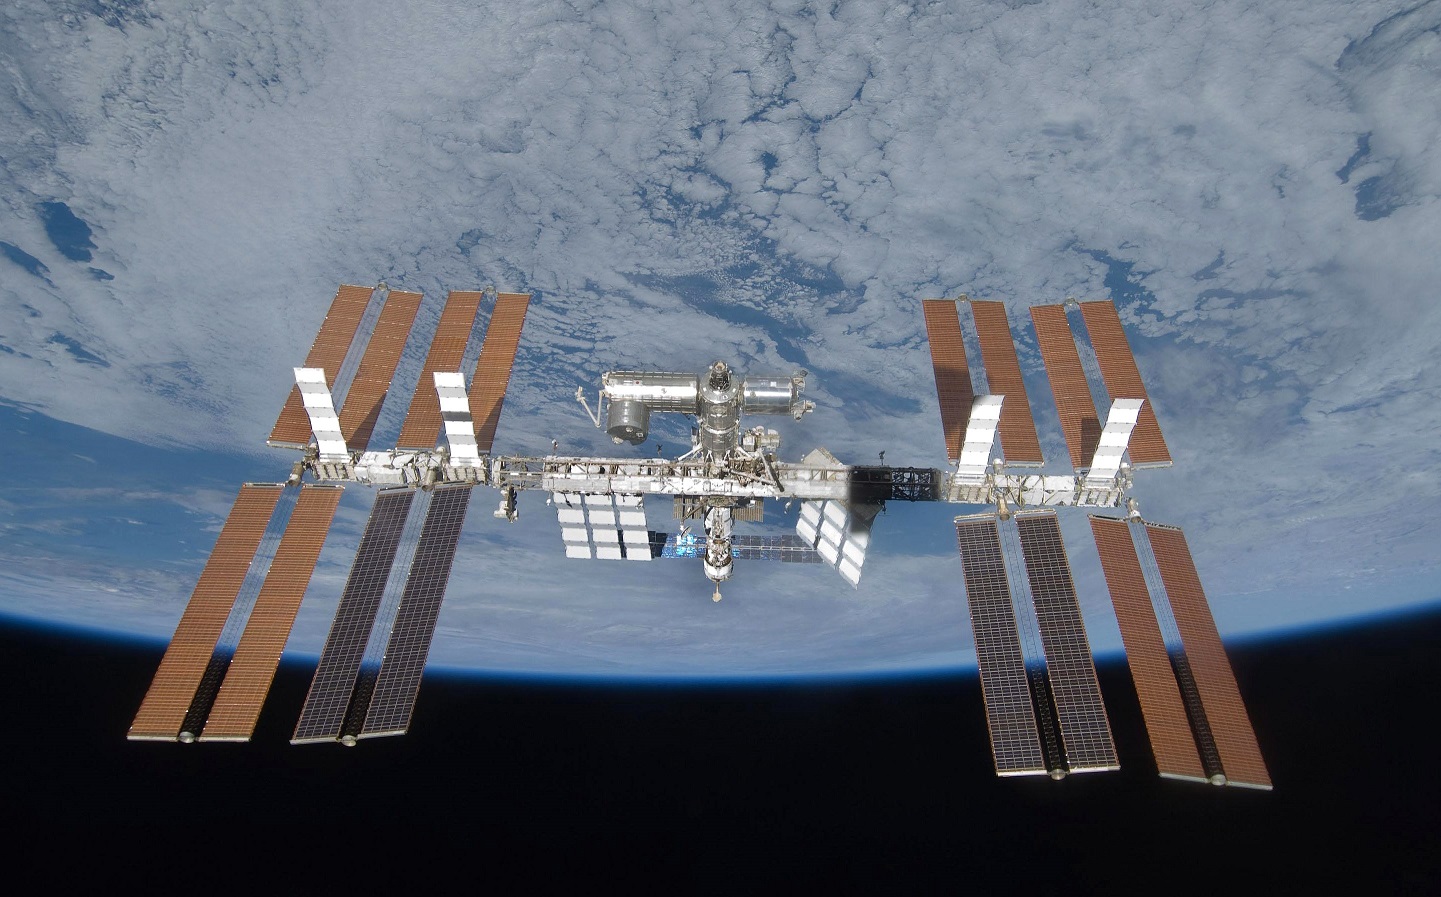 LYFtvNews En : The International Space Station connected via the SpaceDataHighway 52a77f78-a126-498d-8921-4590d0e5370c